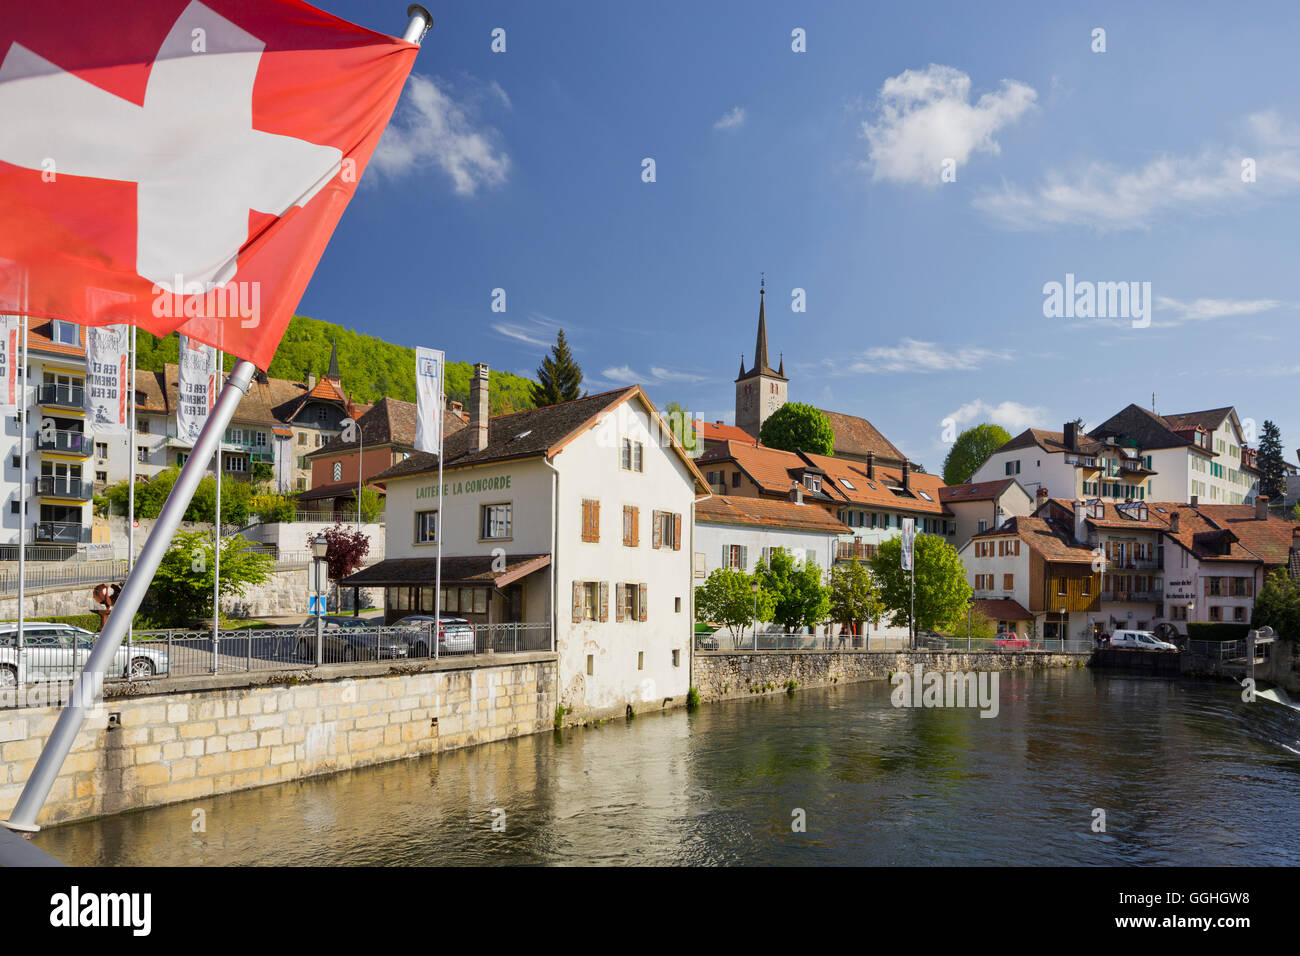 Page 2 - Waadt High Resolution Stock Photography and Images - Alamy